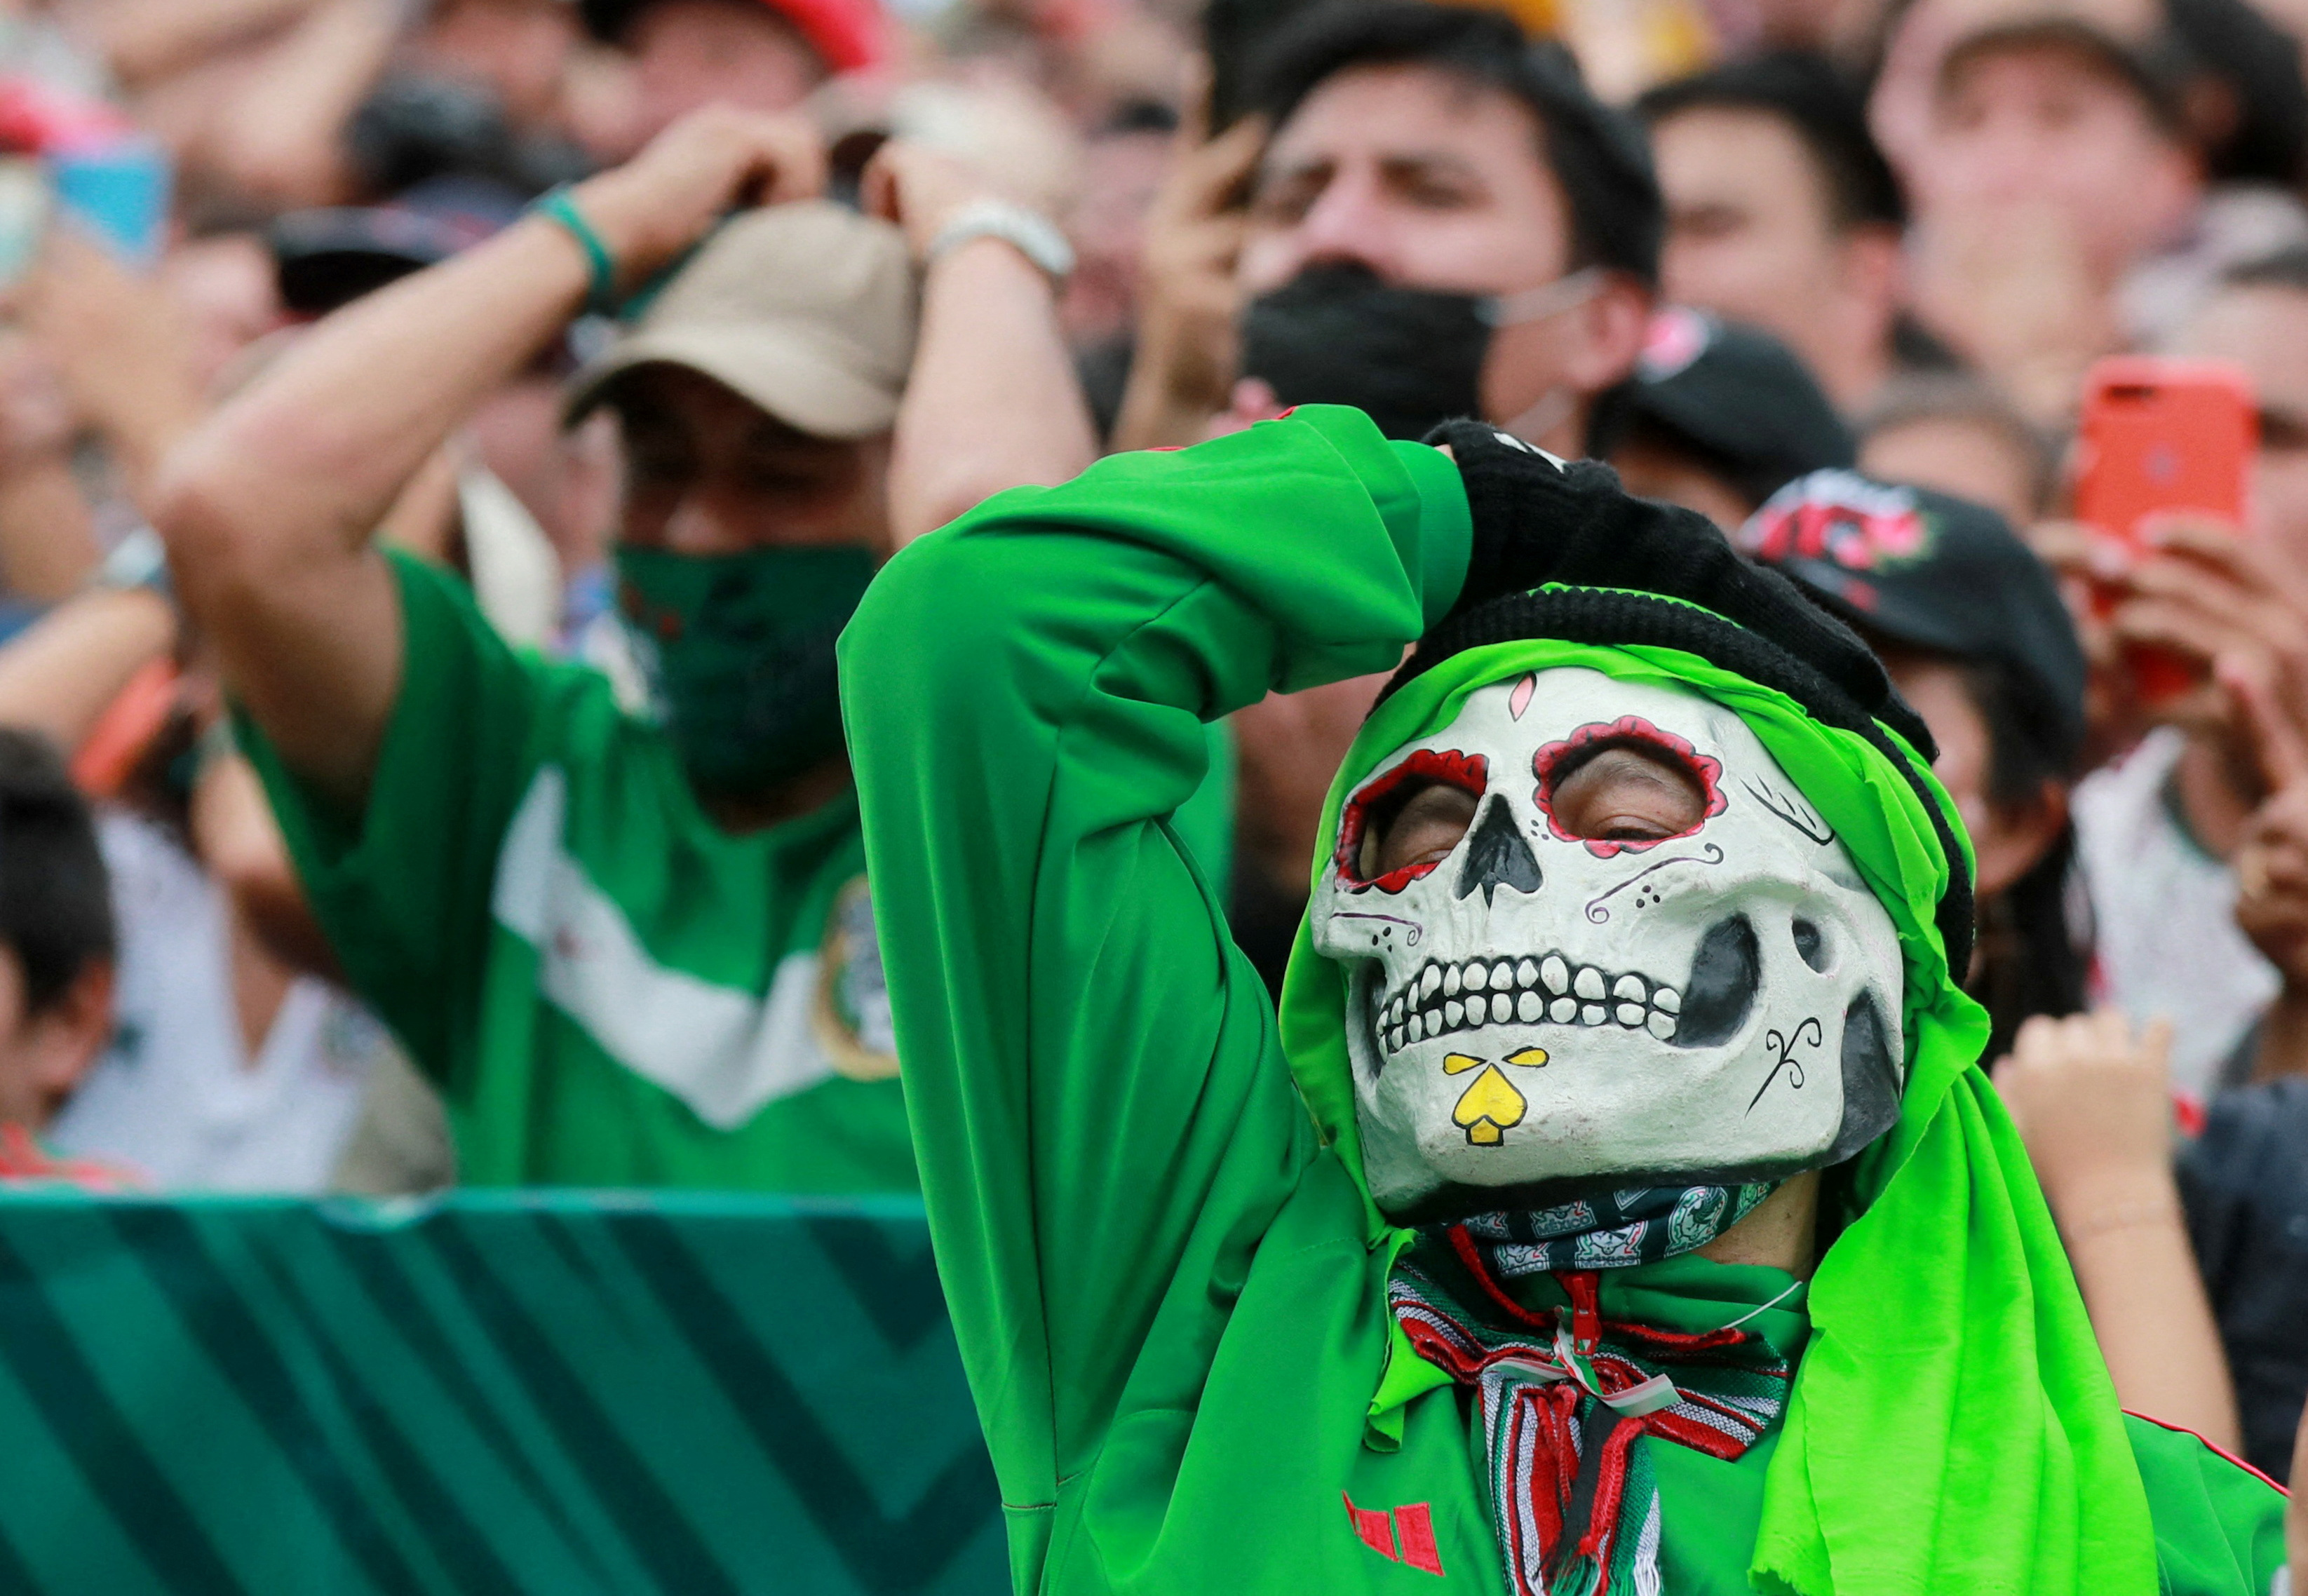 Soccer Football - FIFA World Cup Qatar 2022 - Fans in Mexico City watch Saudi Arabia v Mexico - Mexico City, Mexico - November 30, 2022 A Mexico fan wearing a mask reacts in Mexico City during the Saudi Arabia v Mexico match REUTERS/Henry Romero     TPX IMAGES OF THE DAY